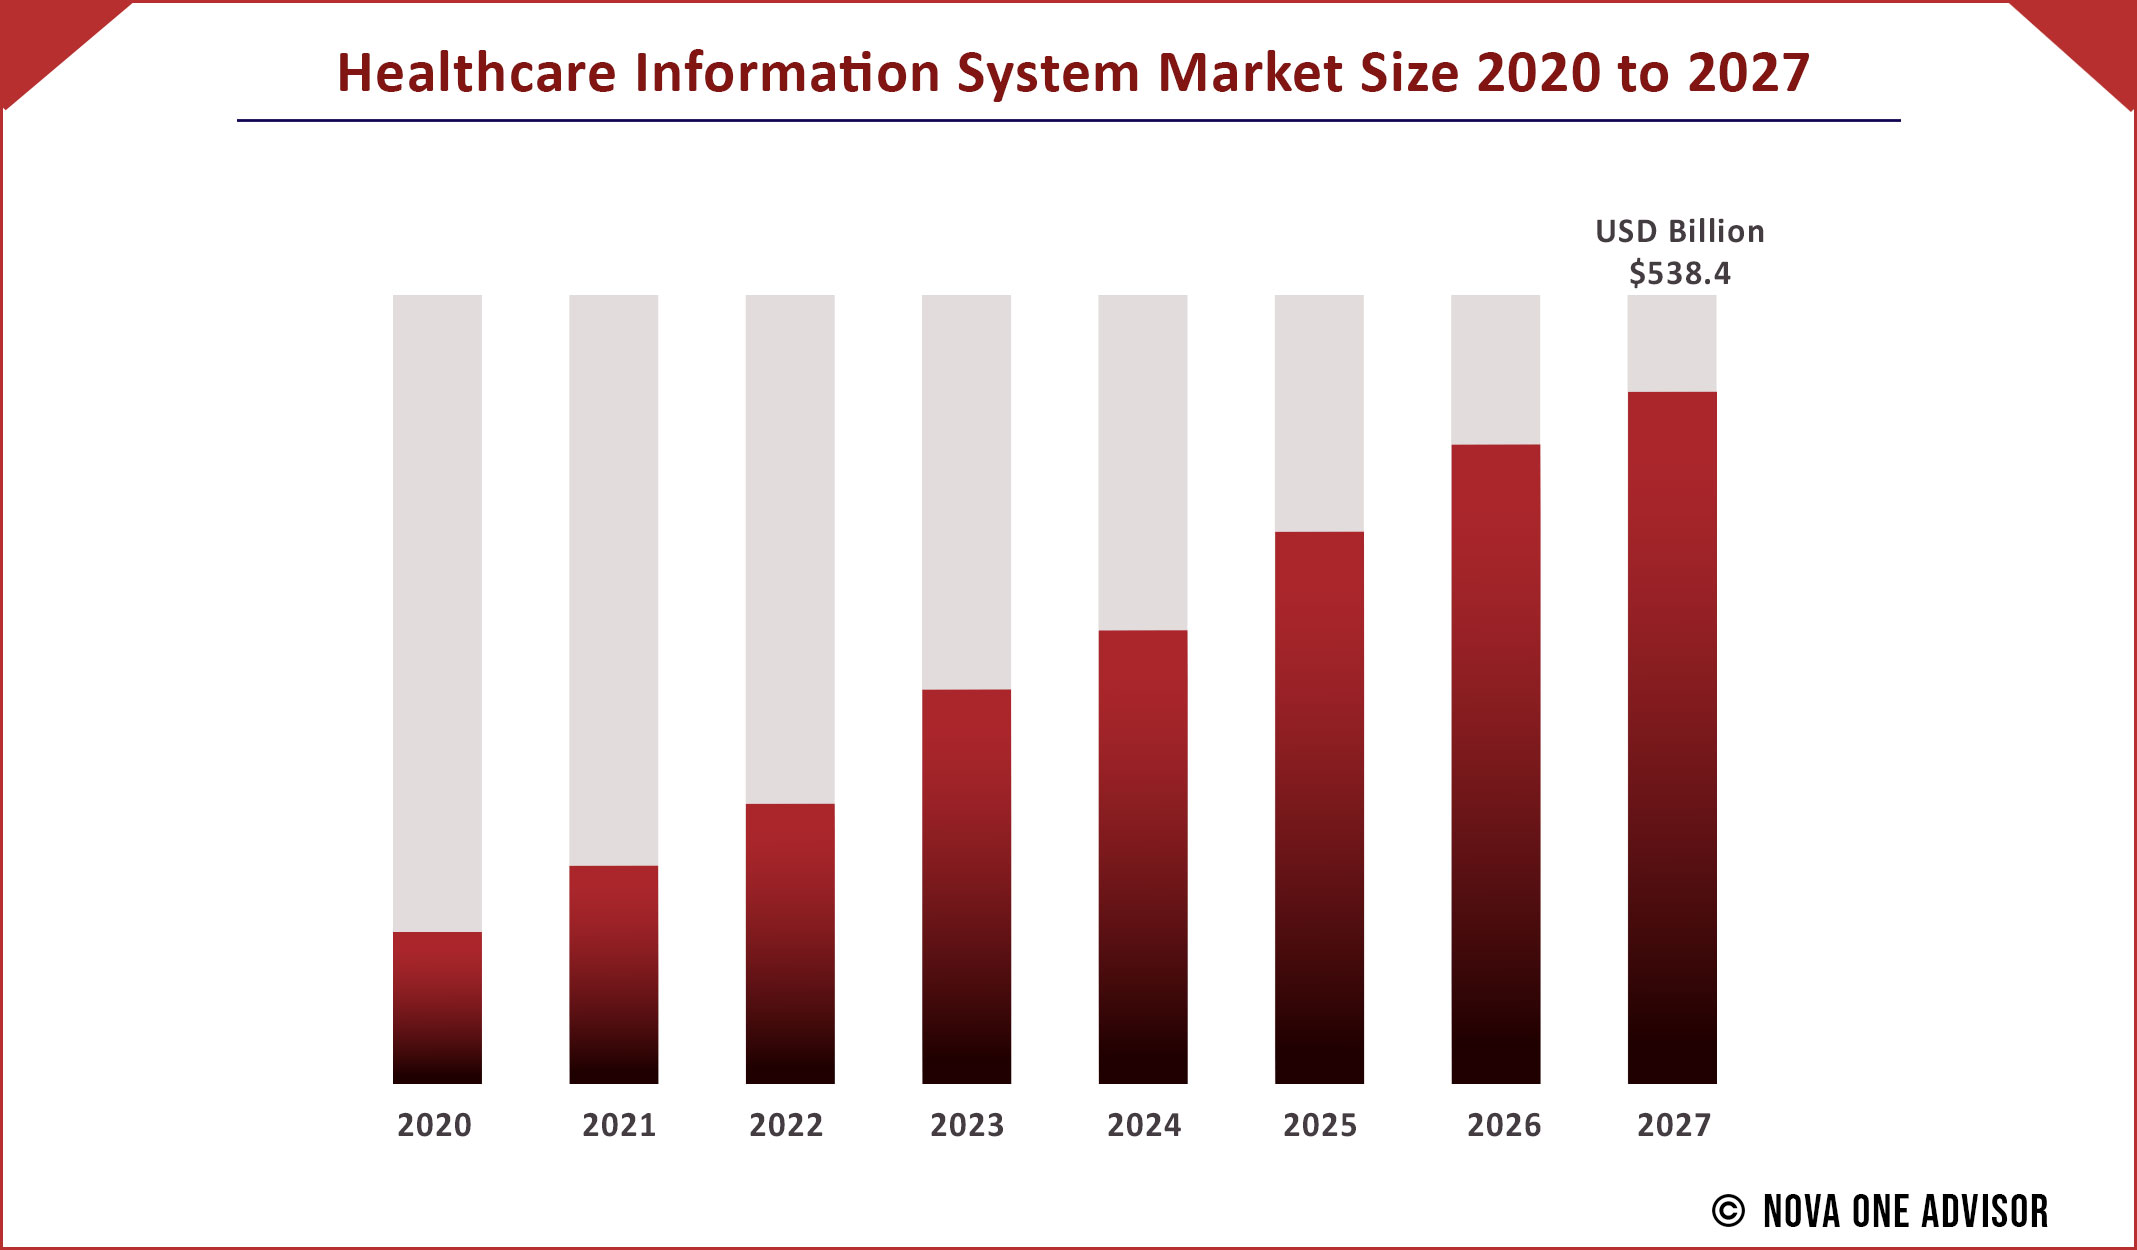 Healthcare Information System Market Size 2020 to 2027